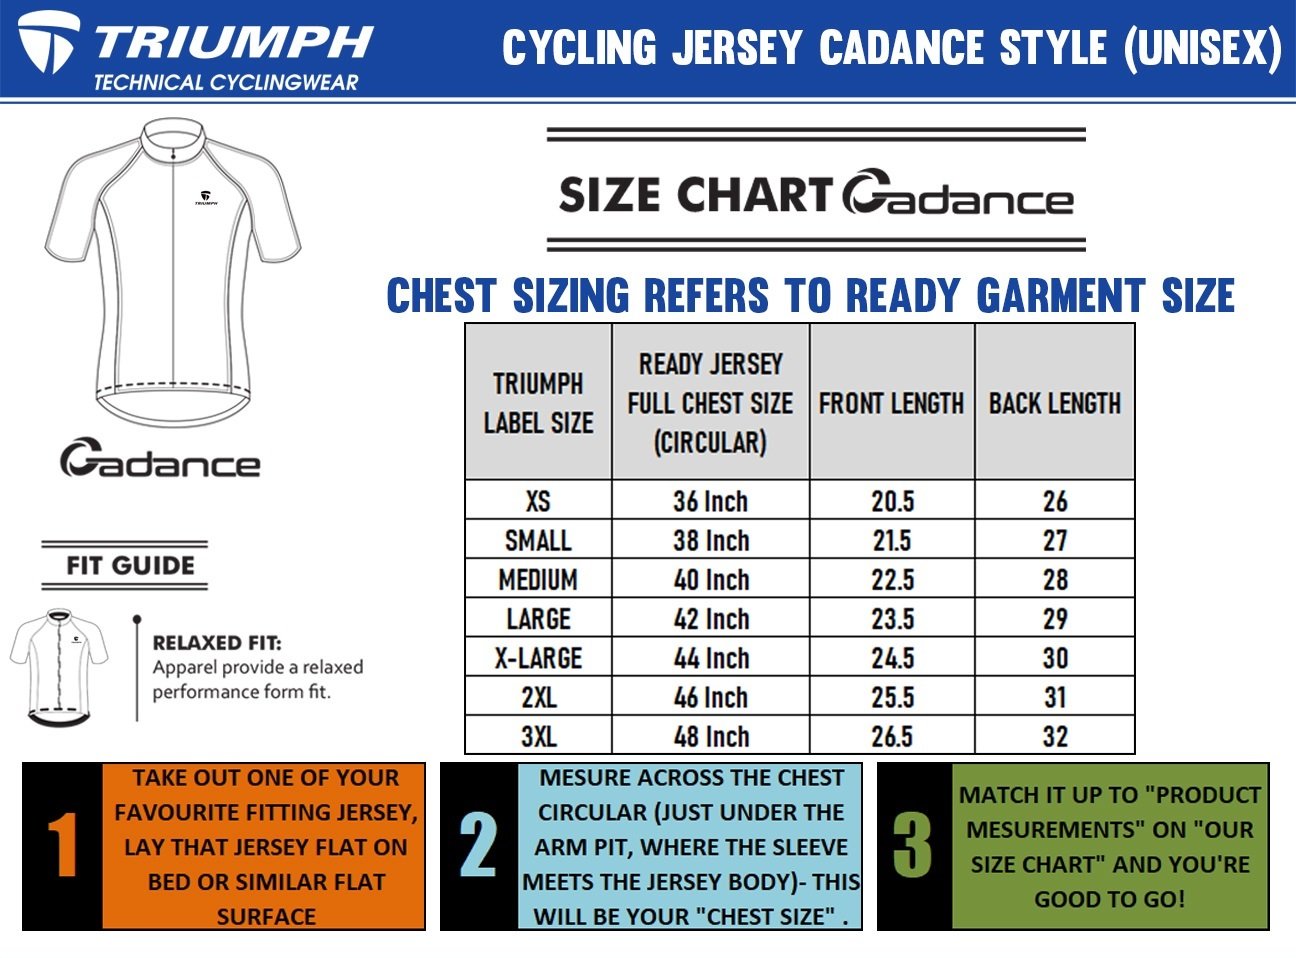 Cycling Jersey Size Chart for Men - Cadance Style